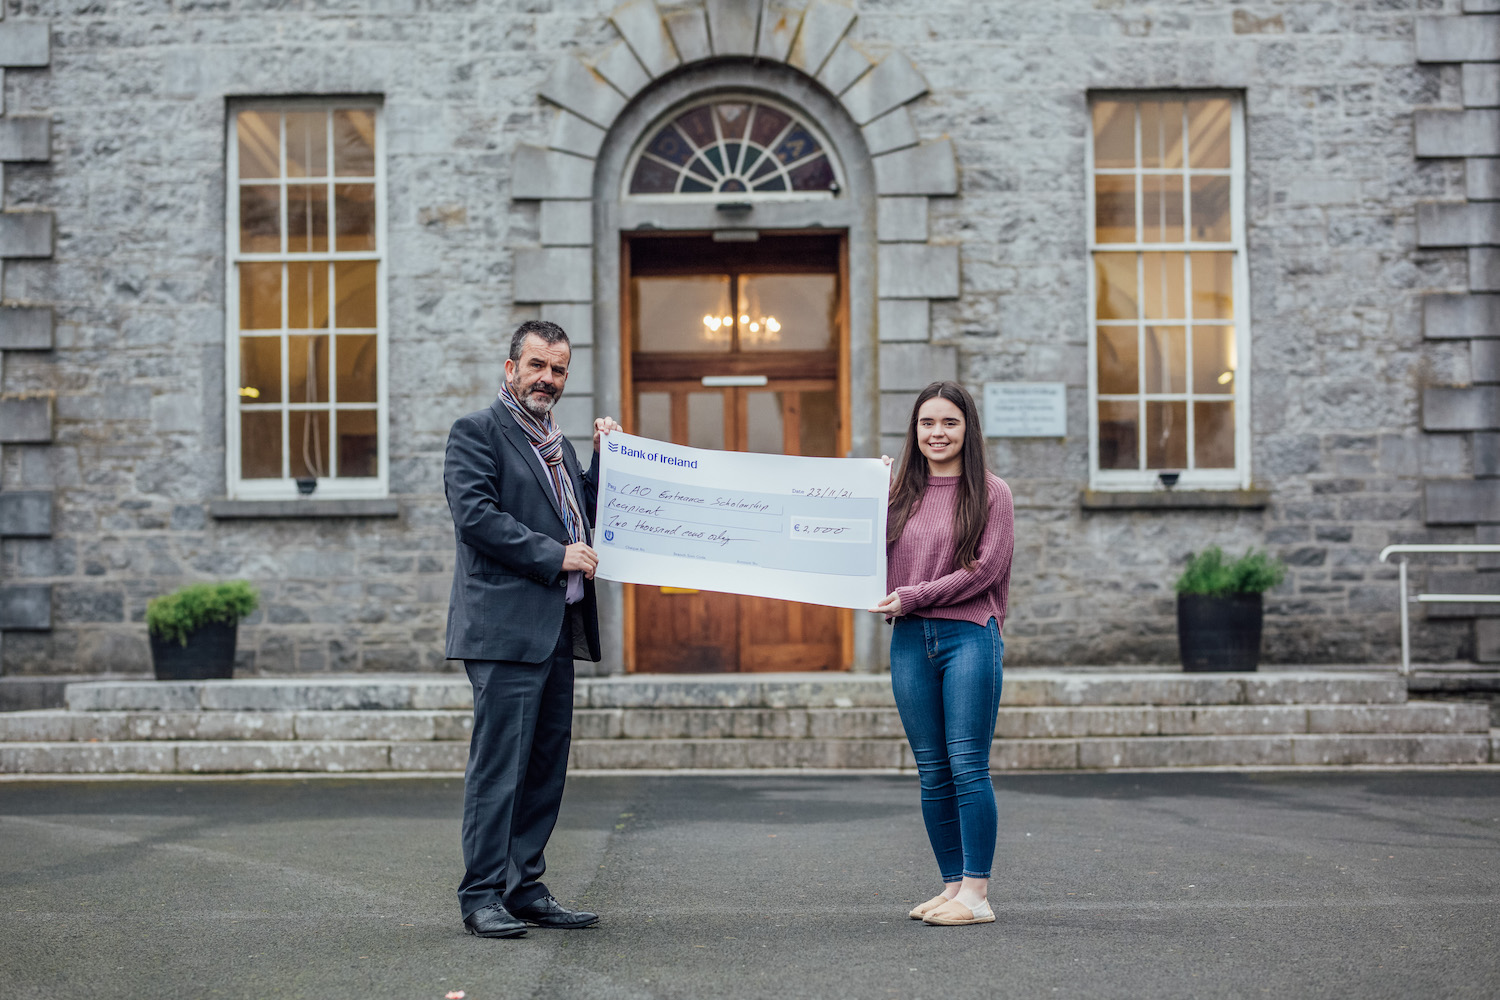 MIC Entrance Scholarships 2021 - Pictured at Mary Immaculate College (MIC) was Ciara Brouder from Ardagh, Co. Limerick, who received an Undergraduate Entrance Scholarship to the BA in Education, Gaeilge and Business Studies programme at MIC